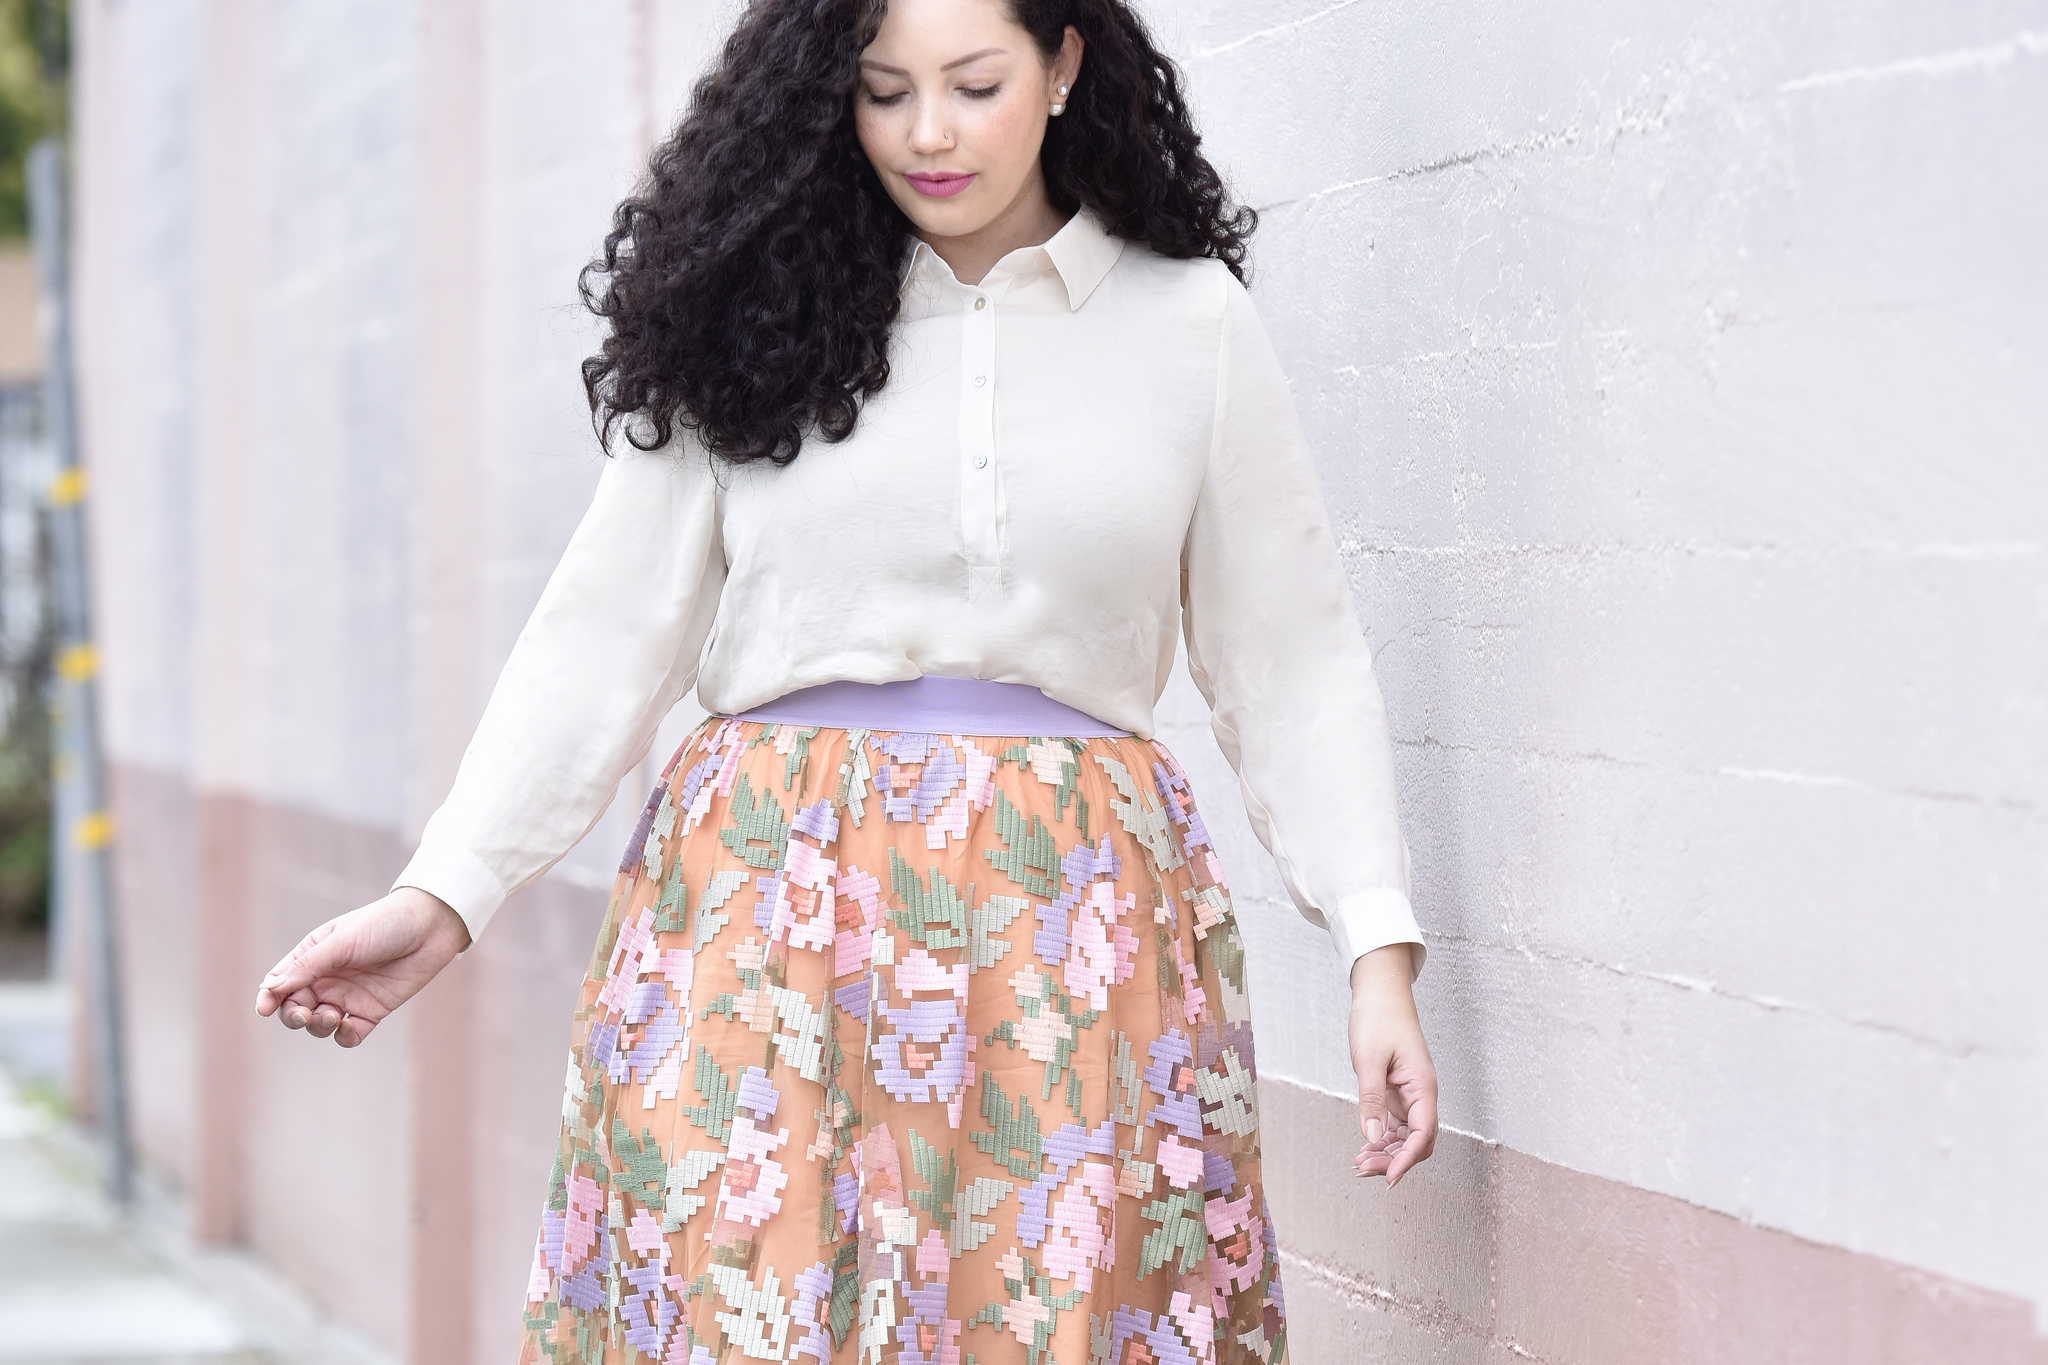 This Pastel Skirt Belongs In Your Spring Wardrobe Via @GirlWithCurves #outfits #blogger #plussize #anthropologie.